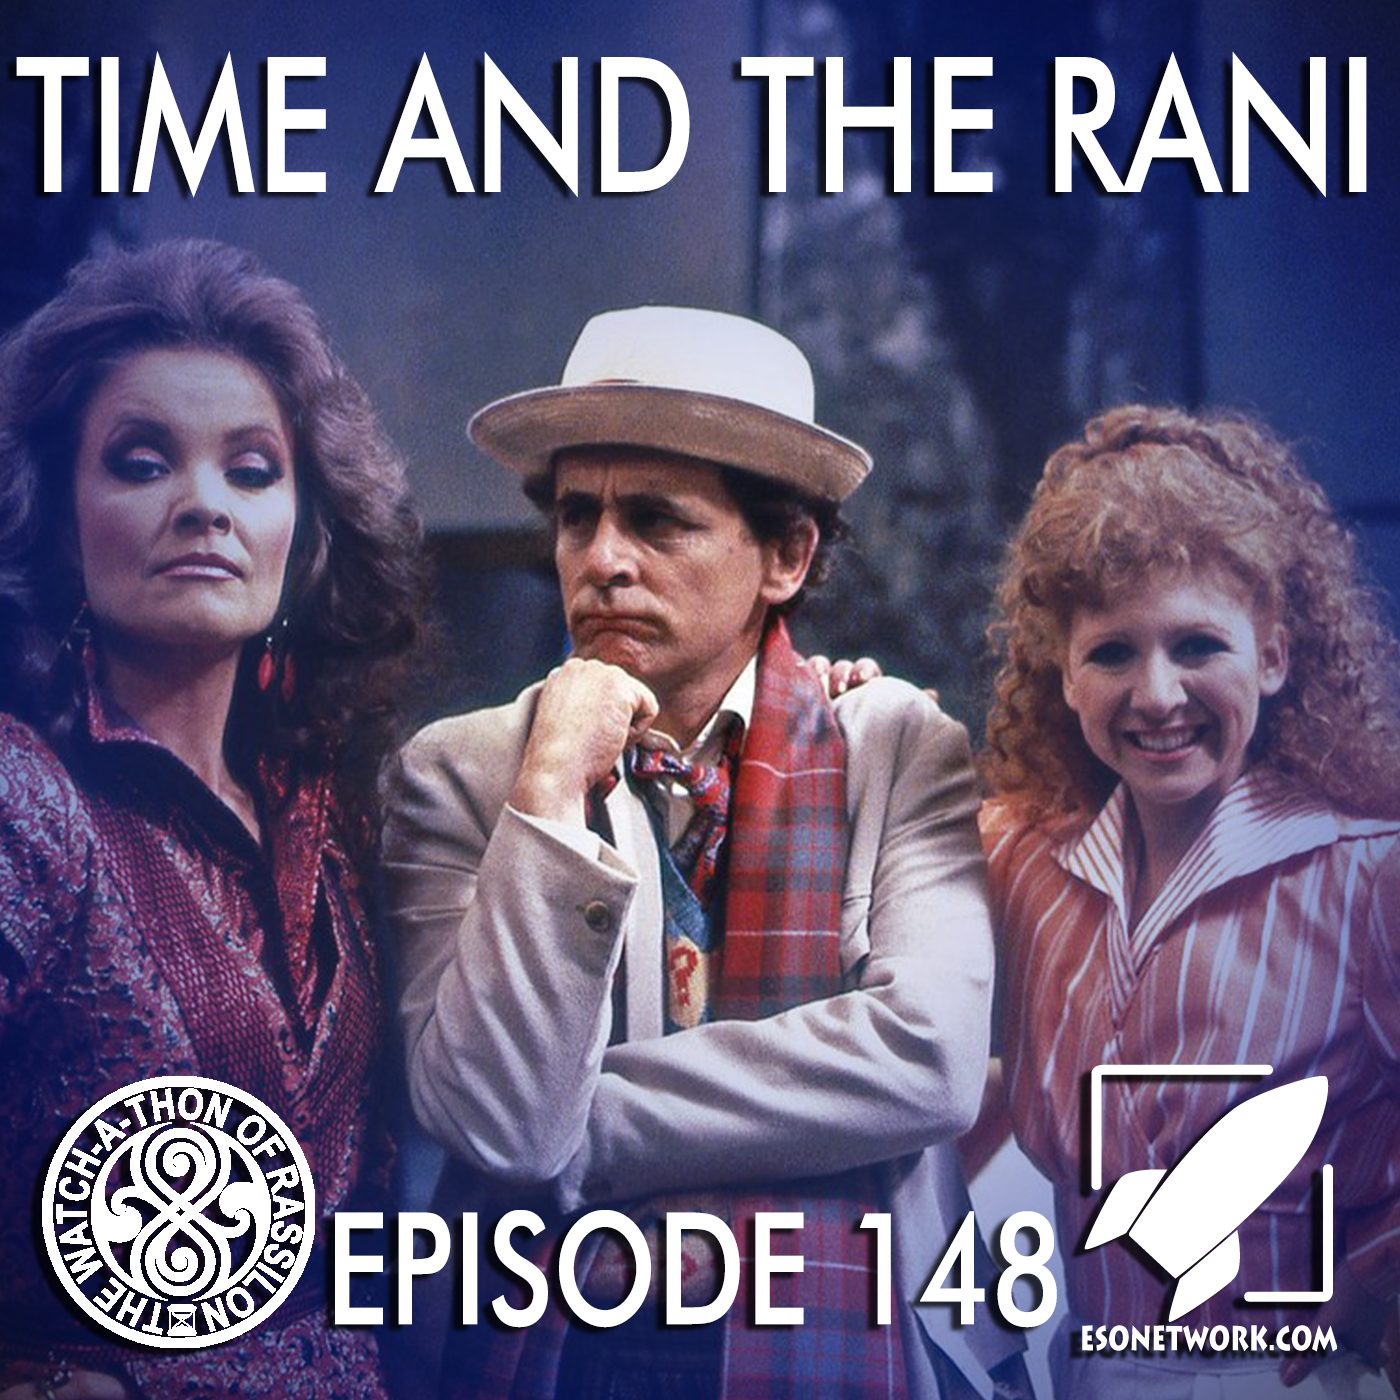 The Watch-A-Thon of Rassilon: Episode 148: Time and the Rani